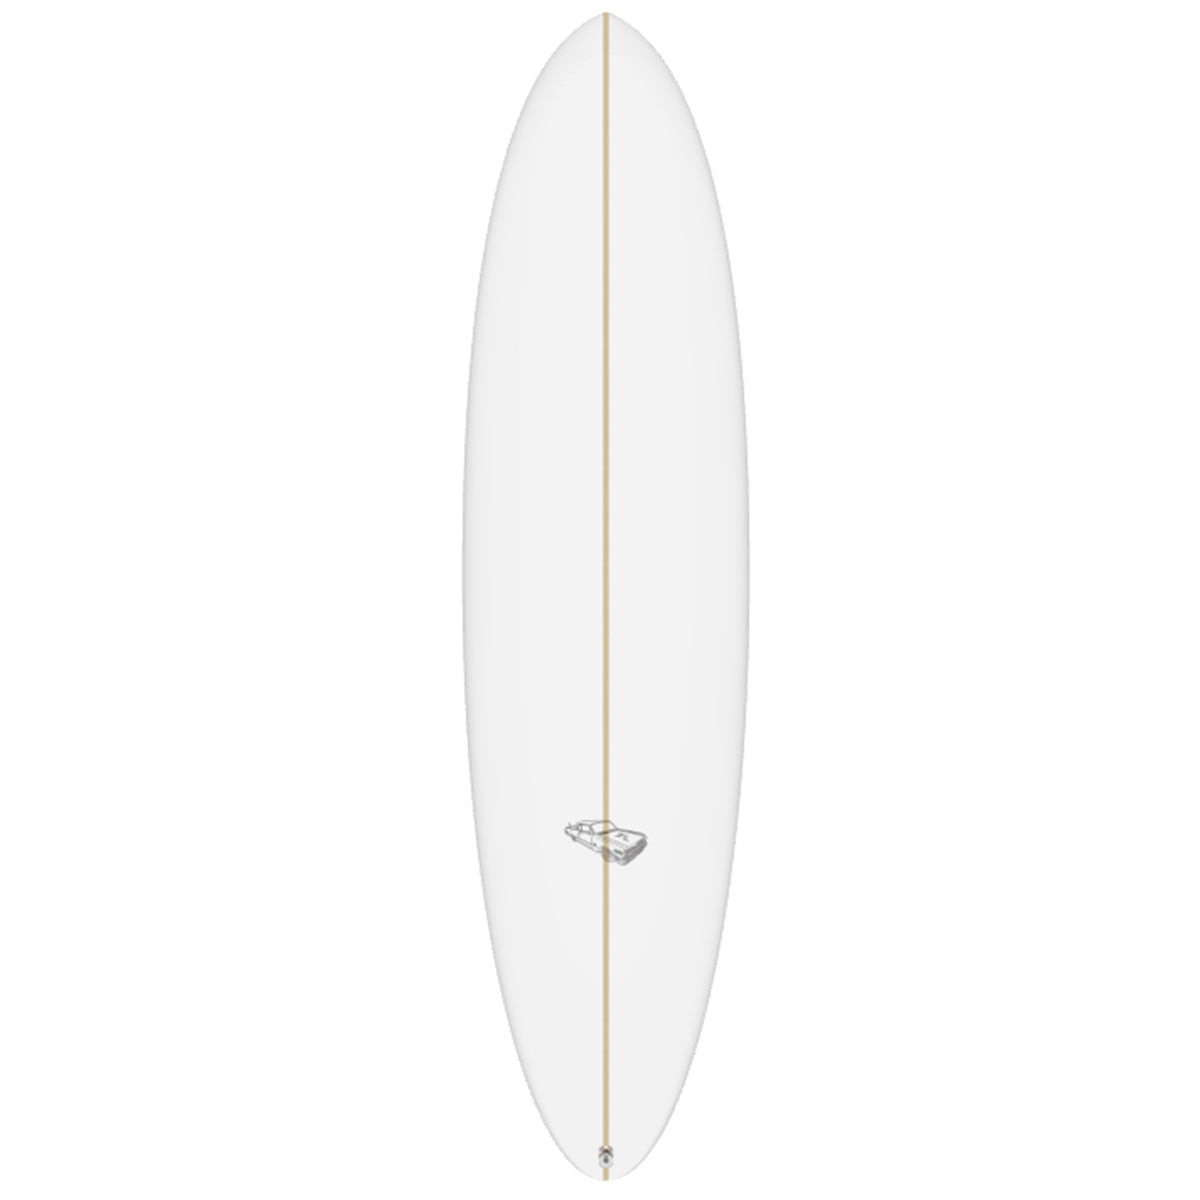 Lowrider - Mid Length - Rusty Surfboards - Top View - Clear